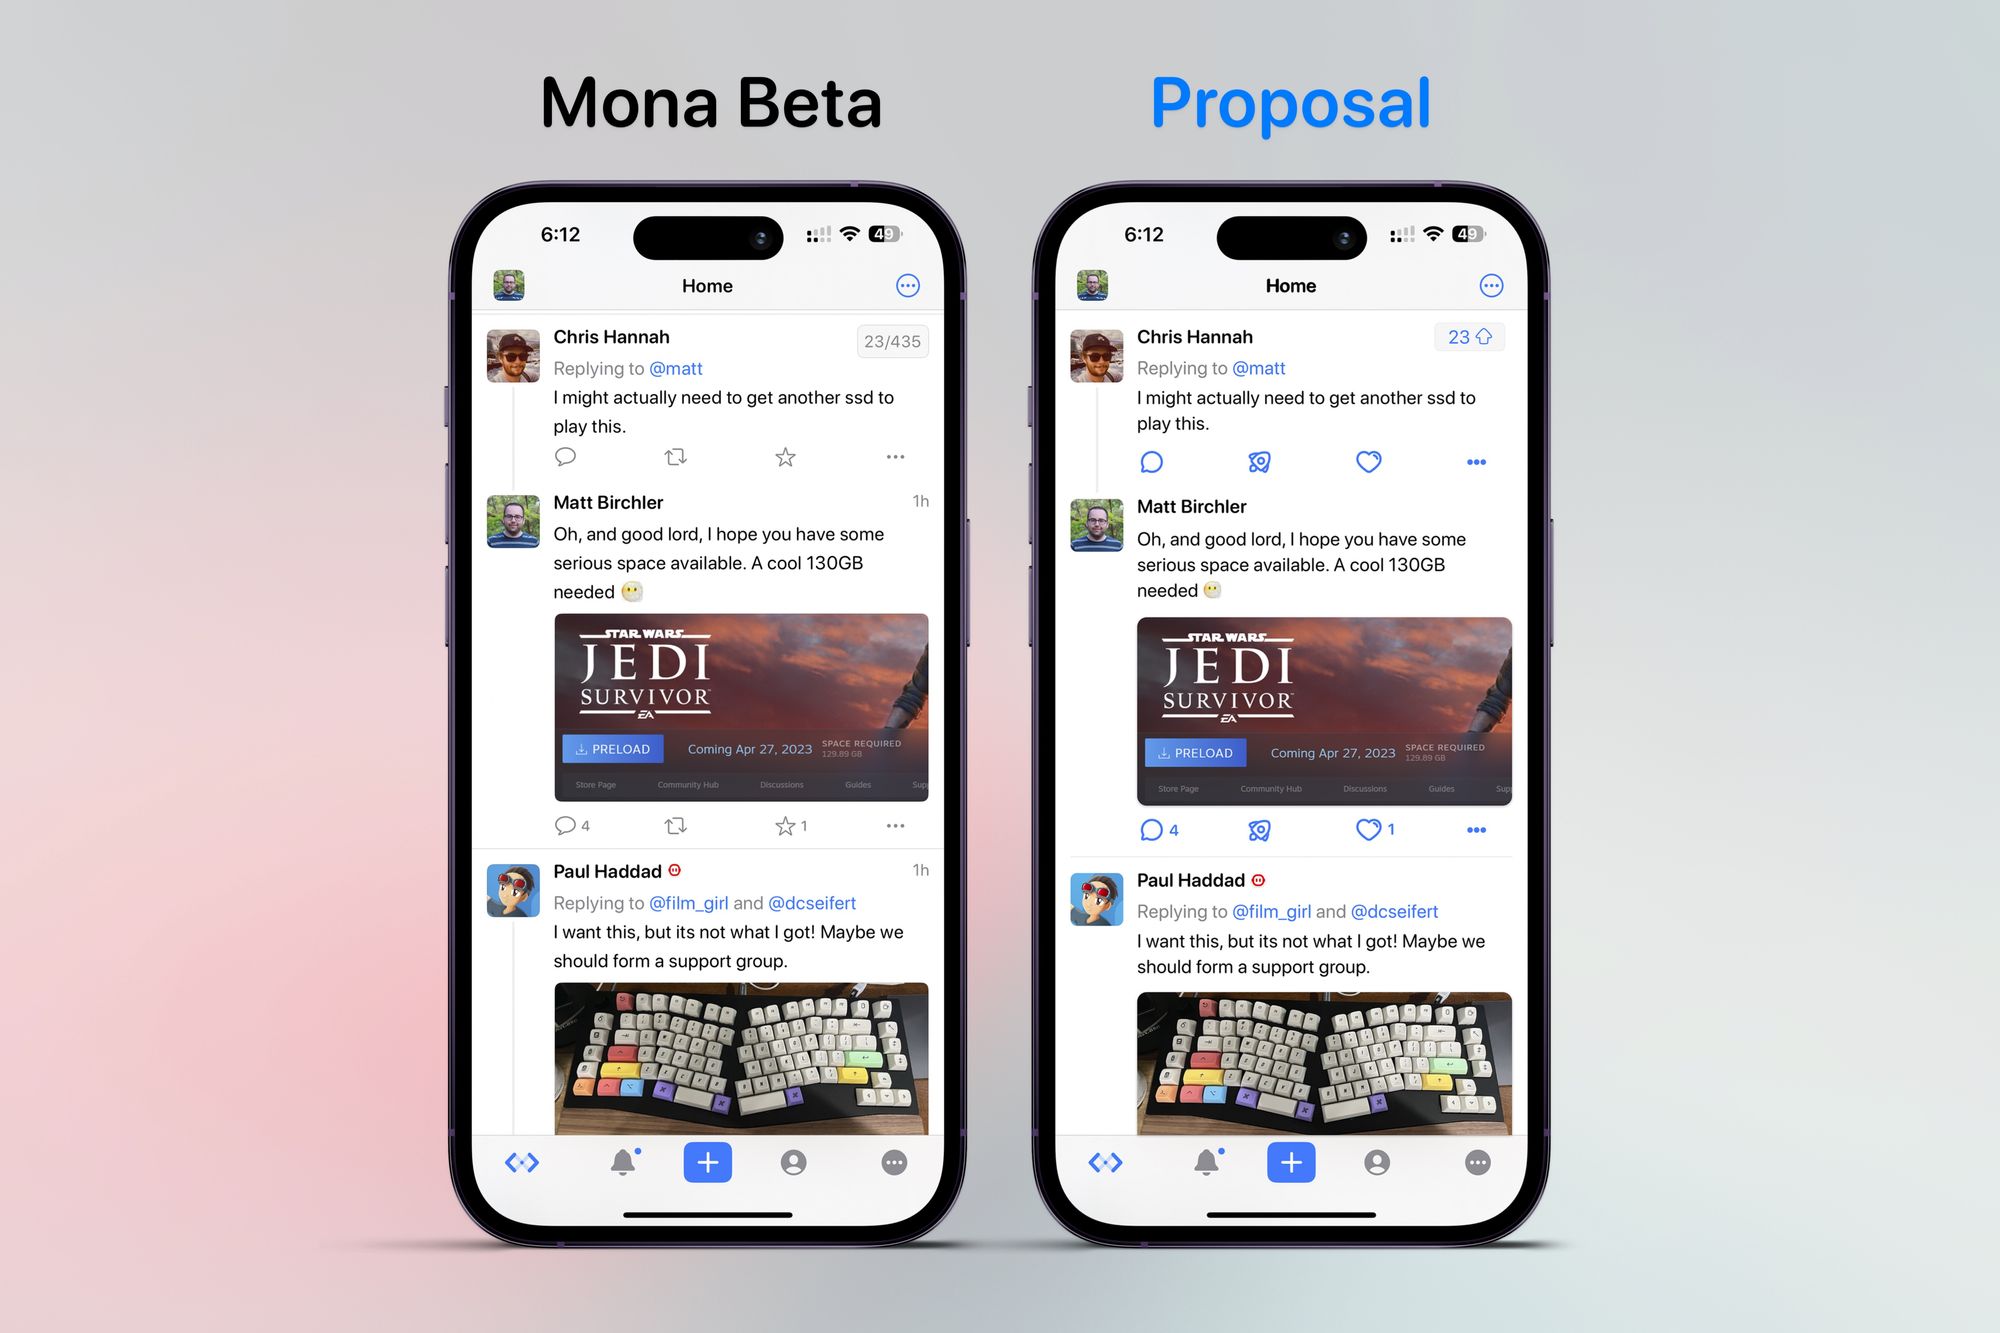 Some Very Small UI Tweaks I'd Love to See in Mona